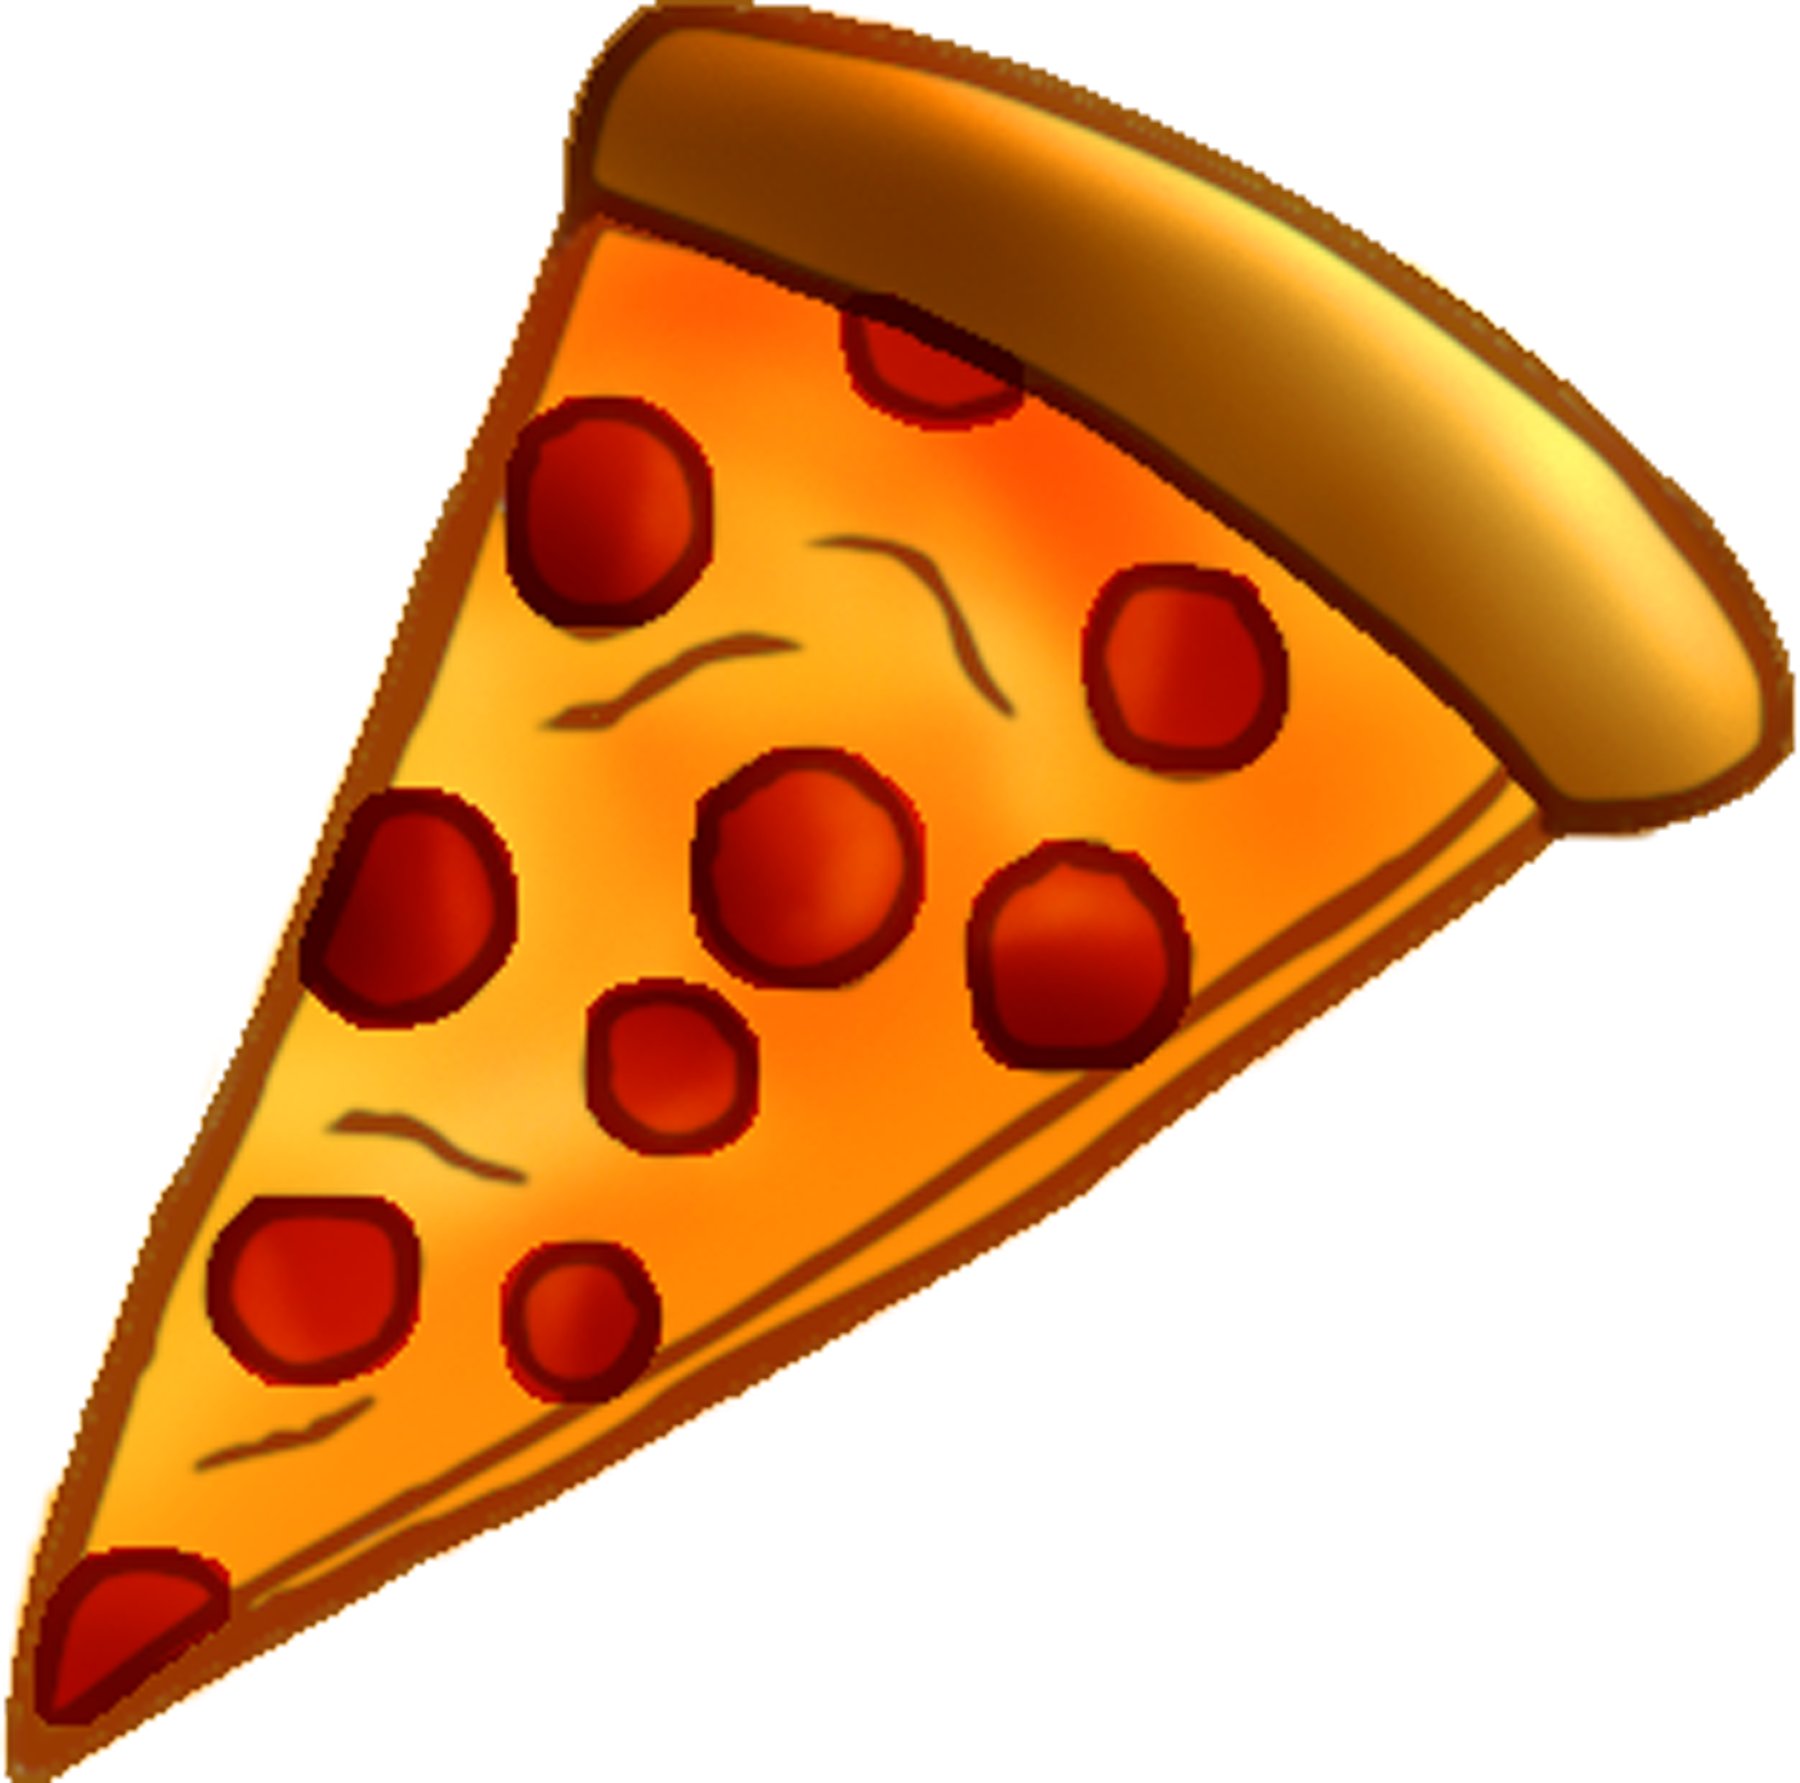 Free Pizza Clipart Transparent Background, Download Free Pizza Clipart ...